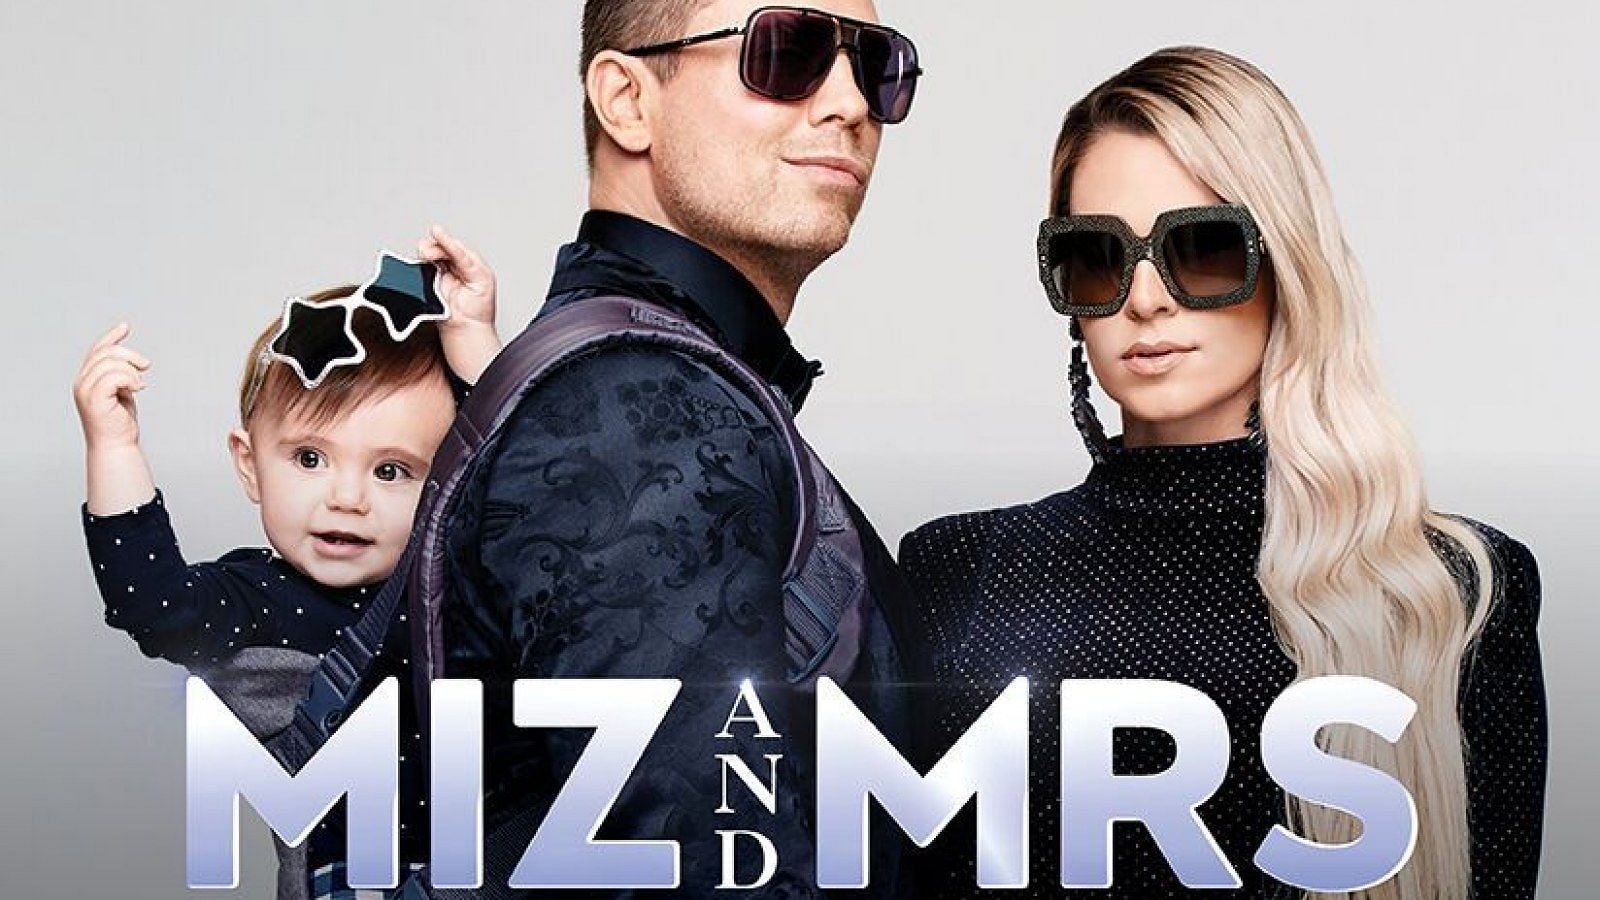 Miz and Mrs. is a television series aired on the USA Network